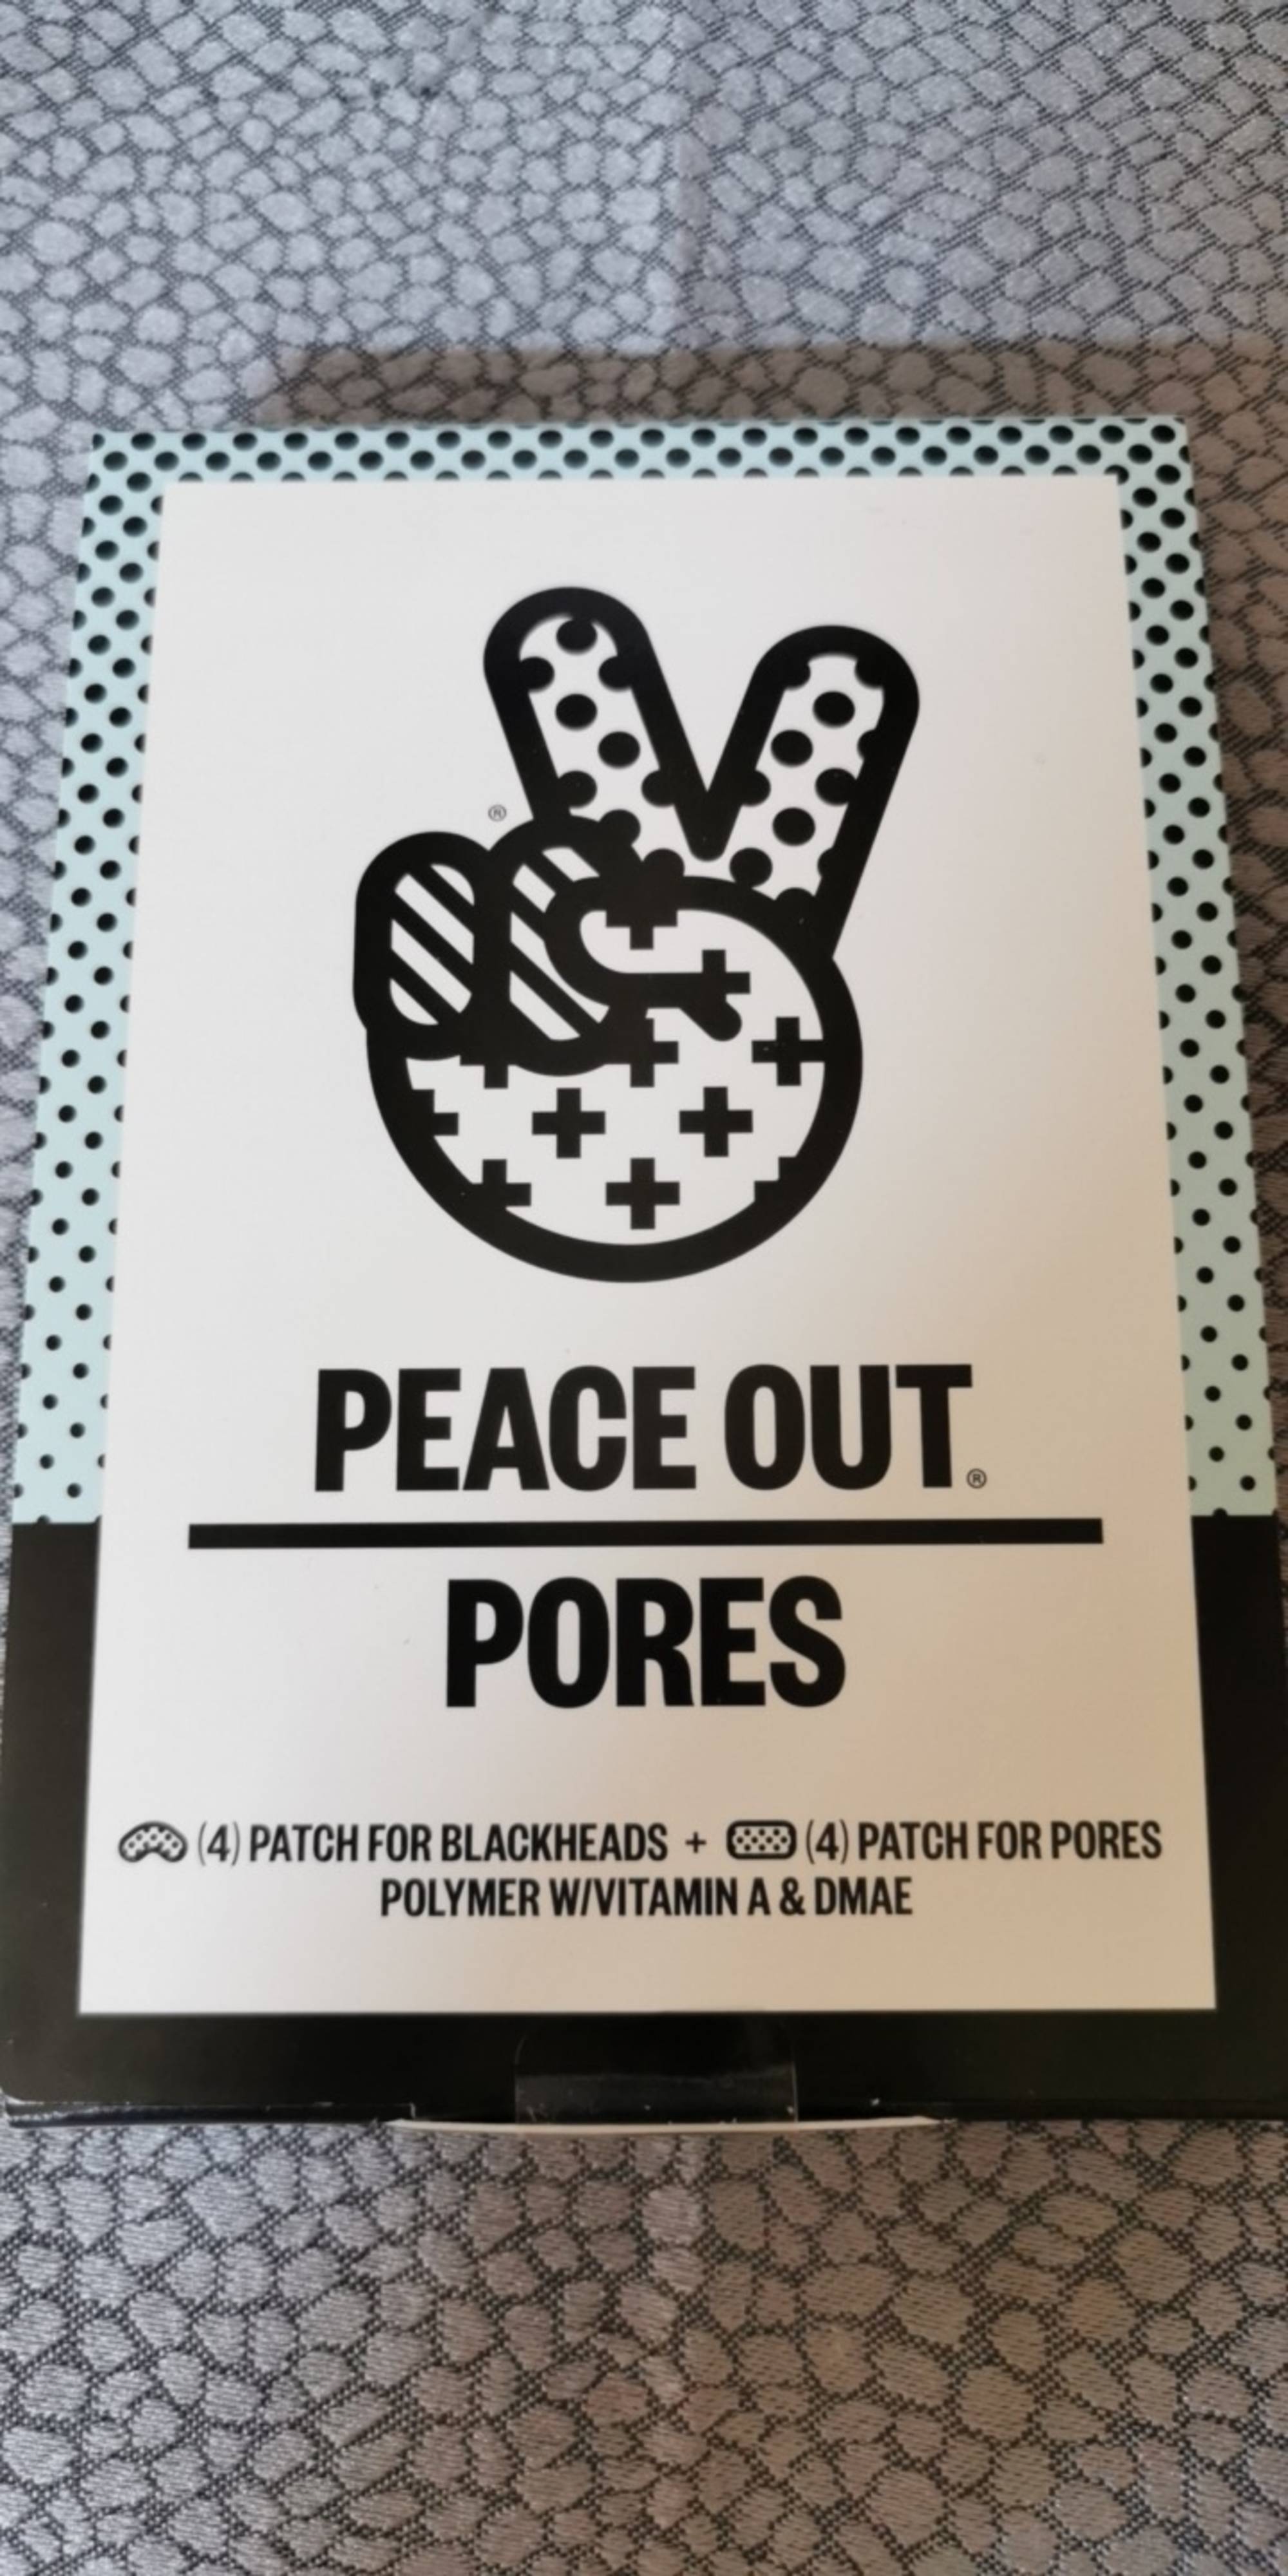 PEACE OUT - Pores - Patch for blackheads